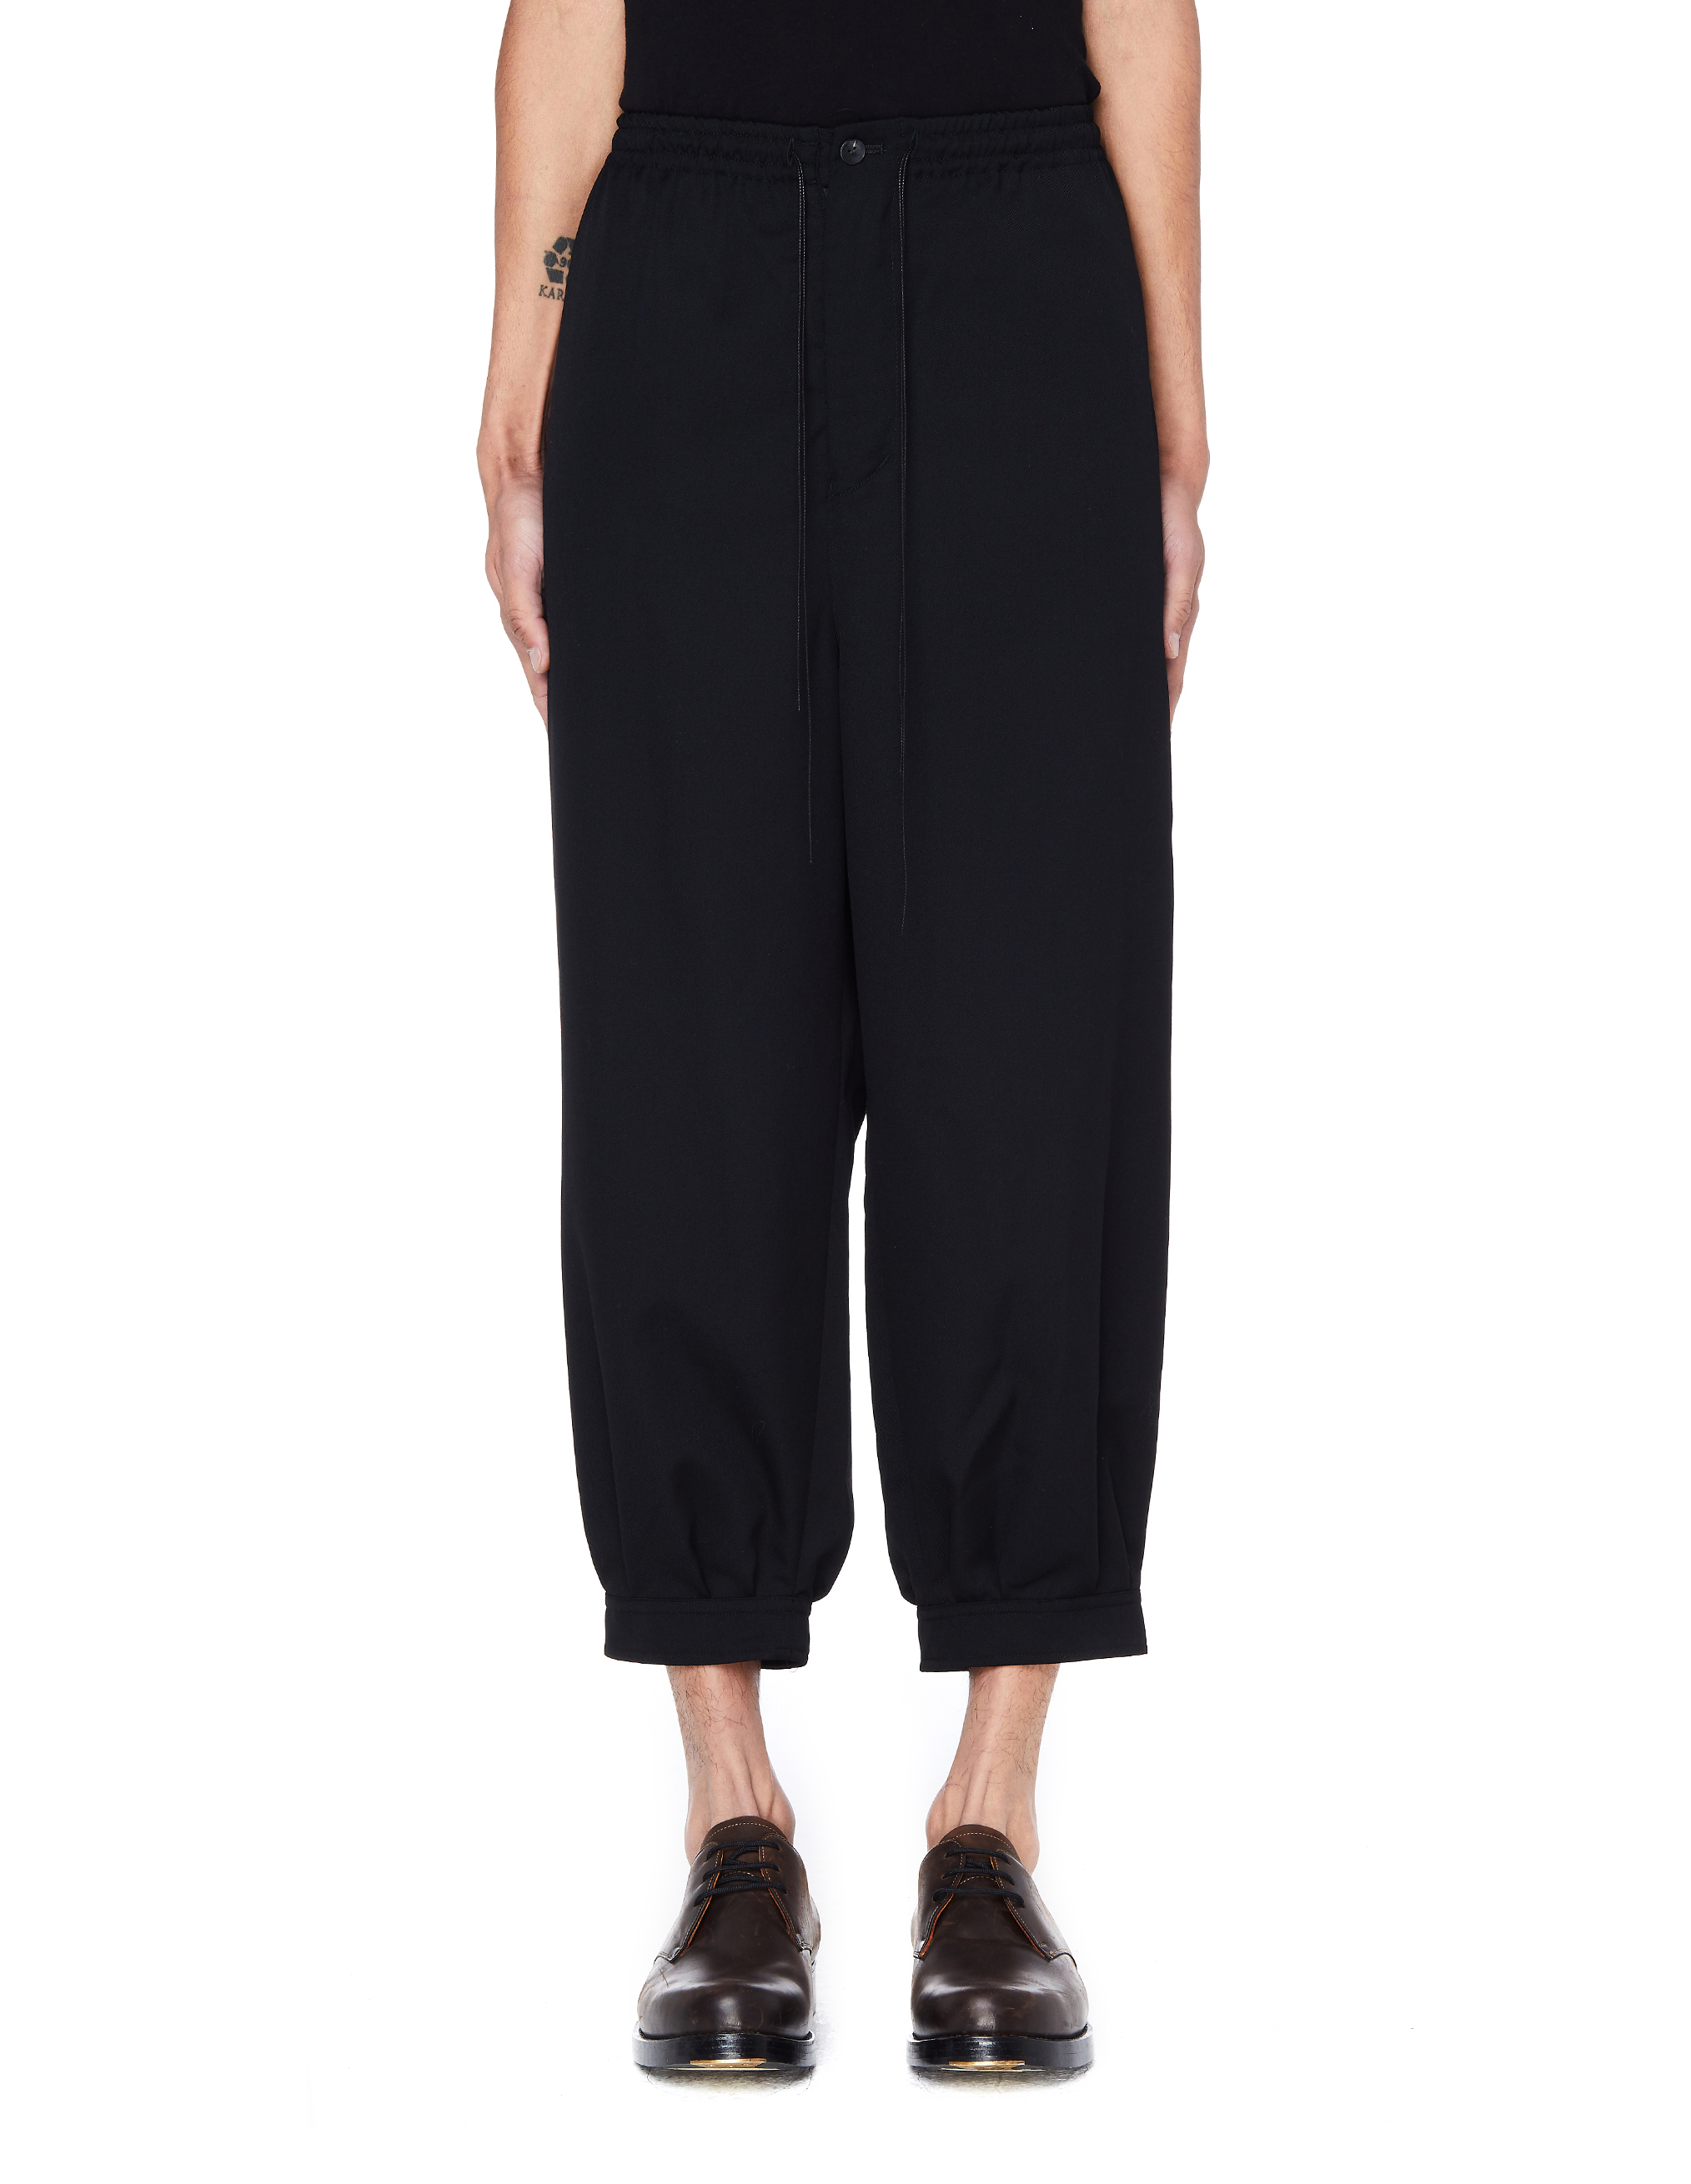 Buy The Viridi-Anne men black cropped wool trousers for $238 online on ...